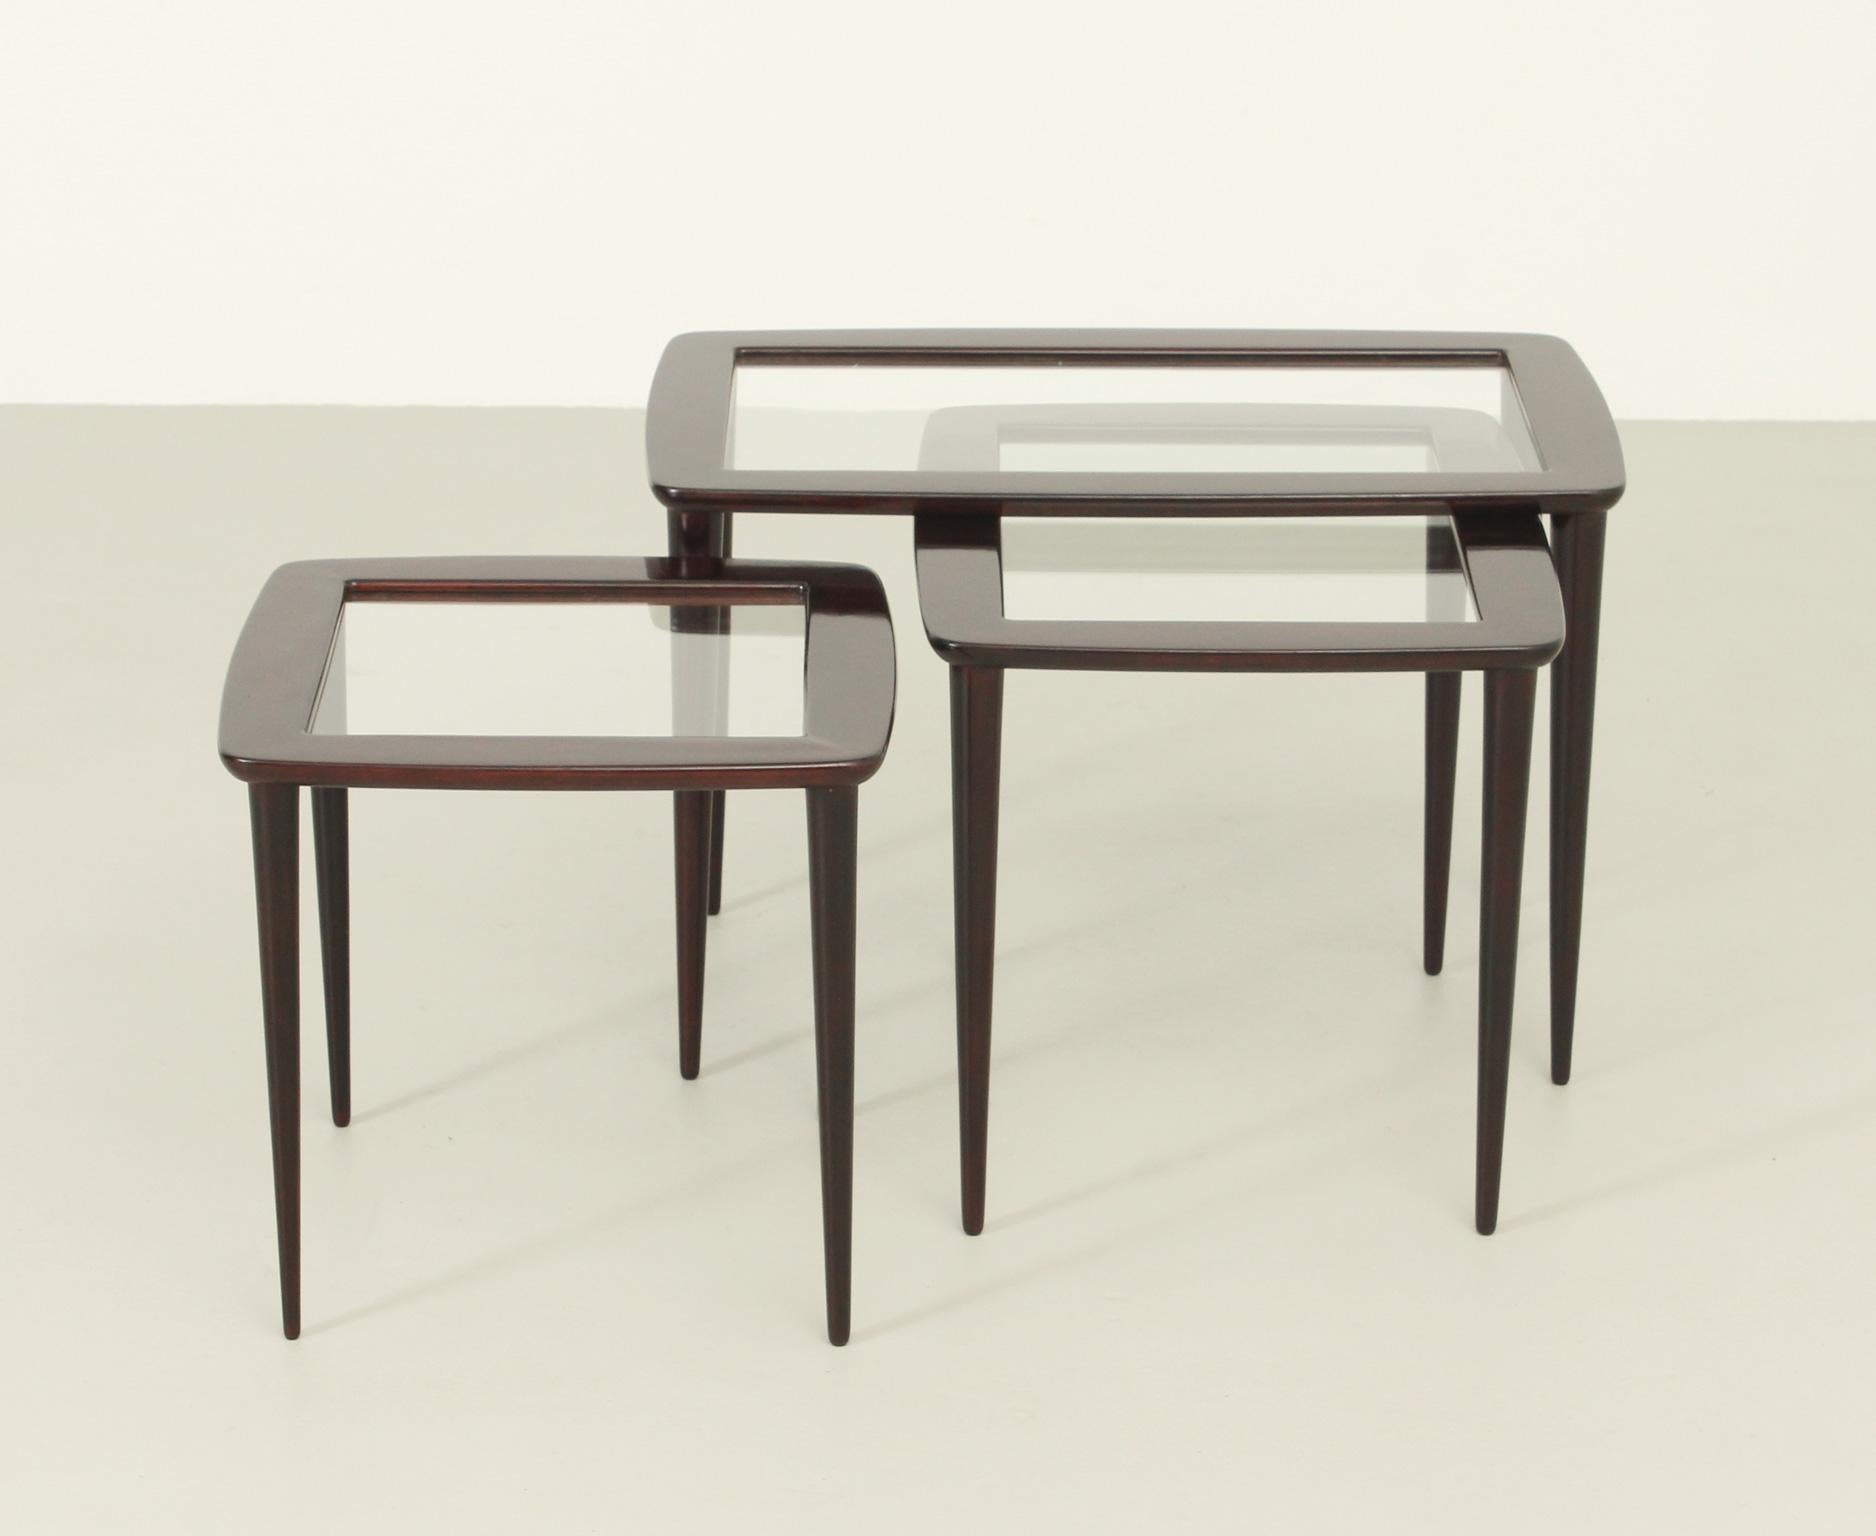 Set of nesting tables model 401 designed in 1955 by Ico Parisi for De Baggis, Italy. Wood frames with original glass tabletop. Legs can be easily removed for an easy transport.